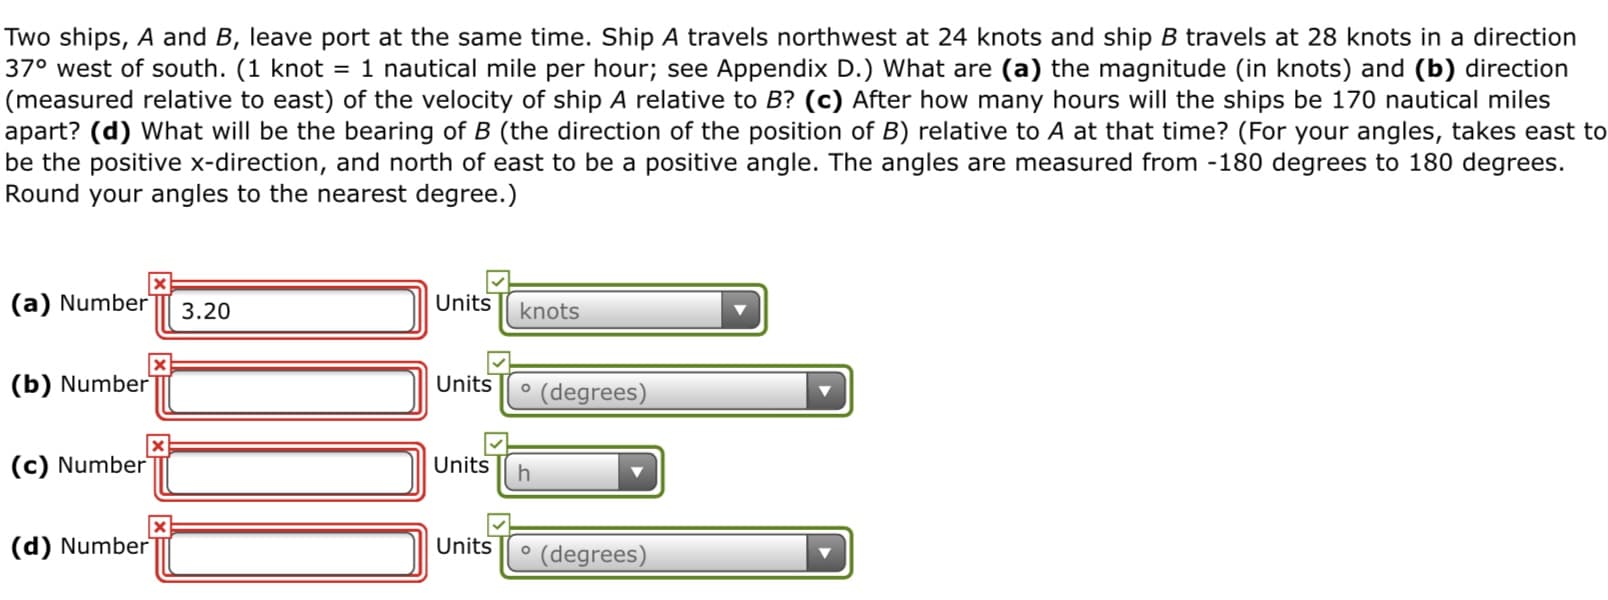 Two ships, A and B, leave port at the same time. Ship A travels northwest at 24 knots and ship B travels at 28 knots in a direction
37° west of south. (1 knot = 1 nautical mile per hour; see Appendix D.) What are (a) the magnitude (in knots) and (b) direction
|(measured relative to east) of the velocity of ship A relative to B? (c) After how many hours will the ships be 170 nautical miles
apart? (d) What will be the bearing of B (the direction of the position of B) relative to A at that time? (For your angles, takes east to
be the positive x-direction, and north of east to be a positive angle. The angles are measured from -180 degrees to 180 degrees.
Round your angles to the nearest degree.)
(a) Number
Units
knots
3.20
Units
(b) Number
° (degrees)
(c) Number
Units
Units
(d) Number
(degrees)
